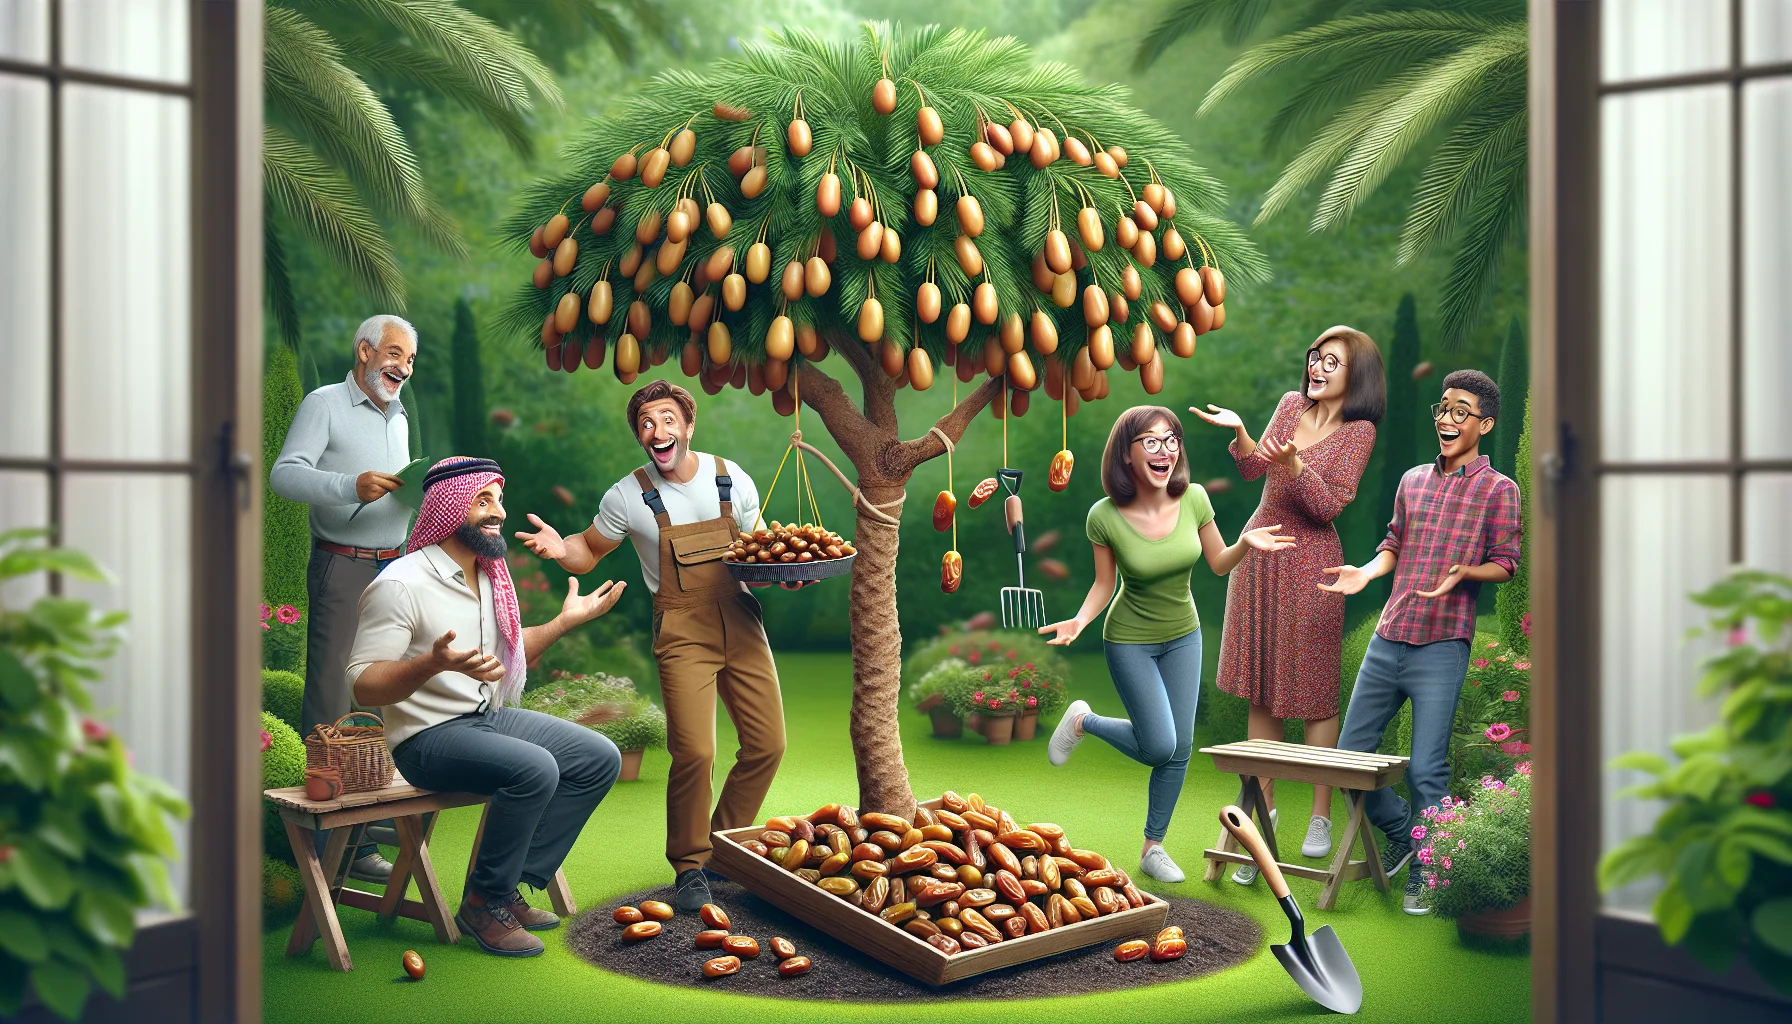 A vivacious and realistic scene transpires in a lush garden, where a medjool date tree stands charming and generously laden with ripe dates. It's surrounded by gleeful people of diverse descents, such as a Middle Eastern man, a Caucasian woman, and a Hispanic teenager, all engaged in fun garden activities. They express amusing surprise as the tree playfully drops dates into their gardening toolboxes. This convivial tableau radiates camaraderie and the joy of gardening, making it seem like an enjoyable pastime.